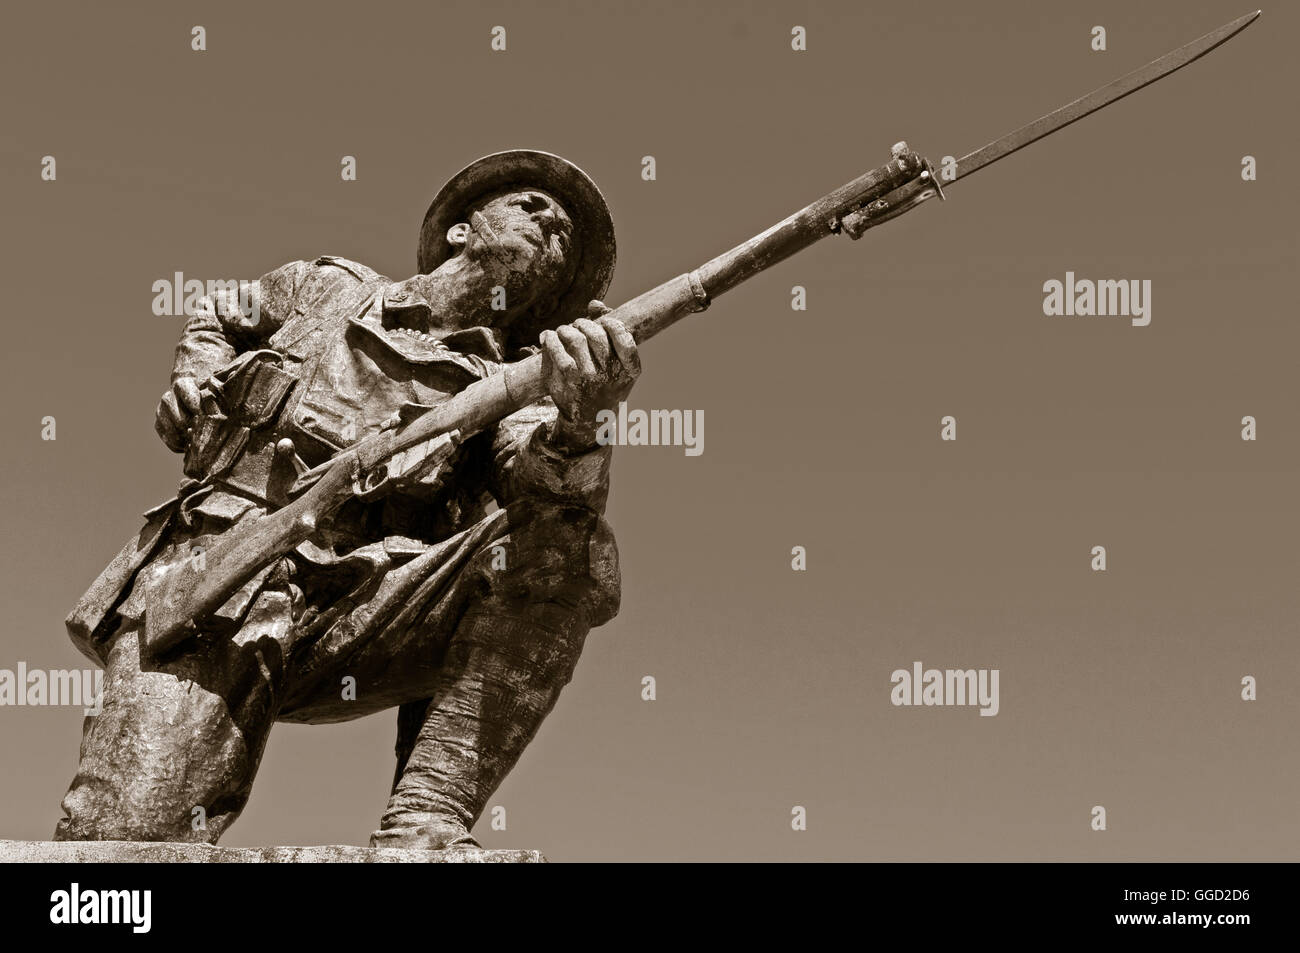 Statue of a British WW1 soldier, wearing a Brody helmet and carrying an SMLE (Lee Enfield) 303 rifle with pattern 1907 bayonet. Stock Photo